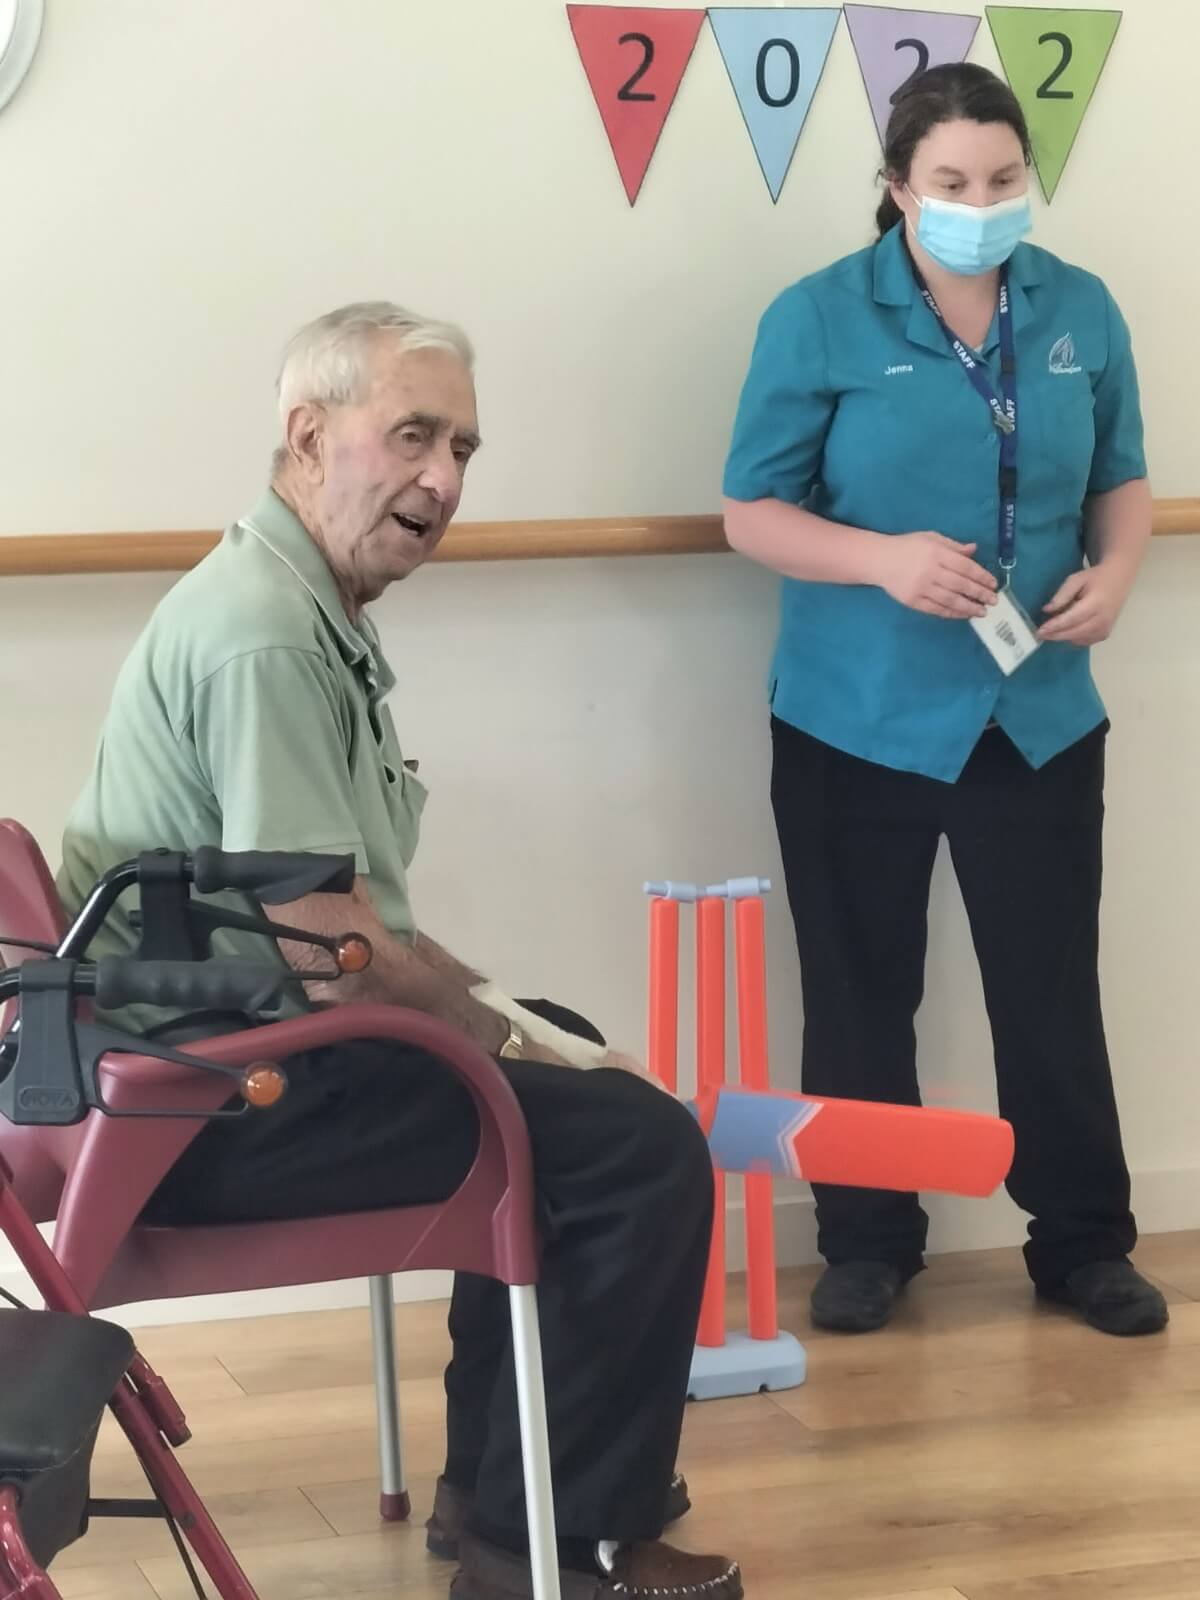 Photo of staff and resident at Yallambee Aged Care as they play indoor cricket. The male residentis holding an orange cricket bat and sitting down while he bats.